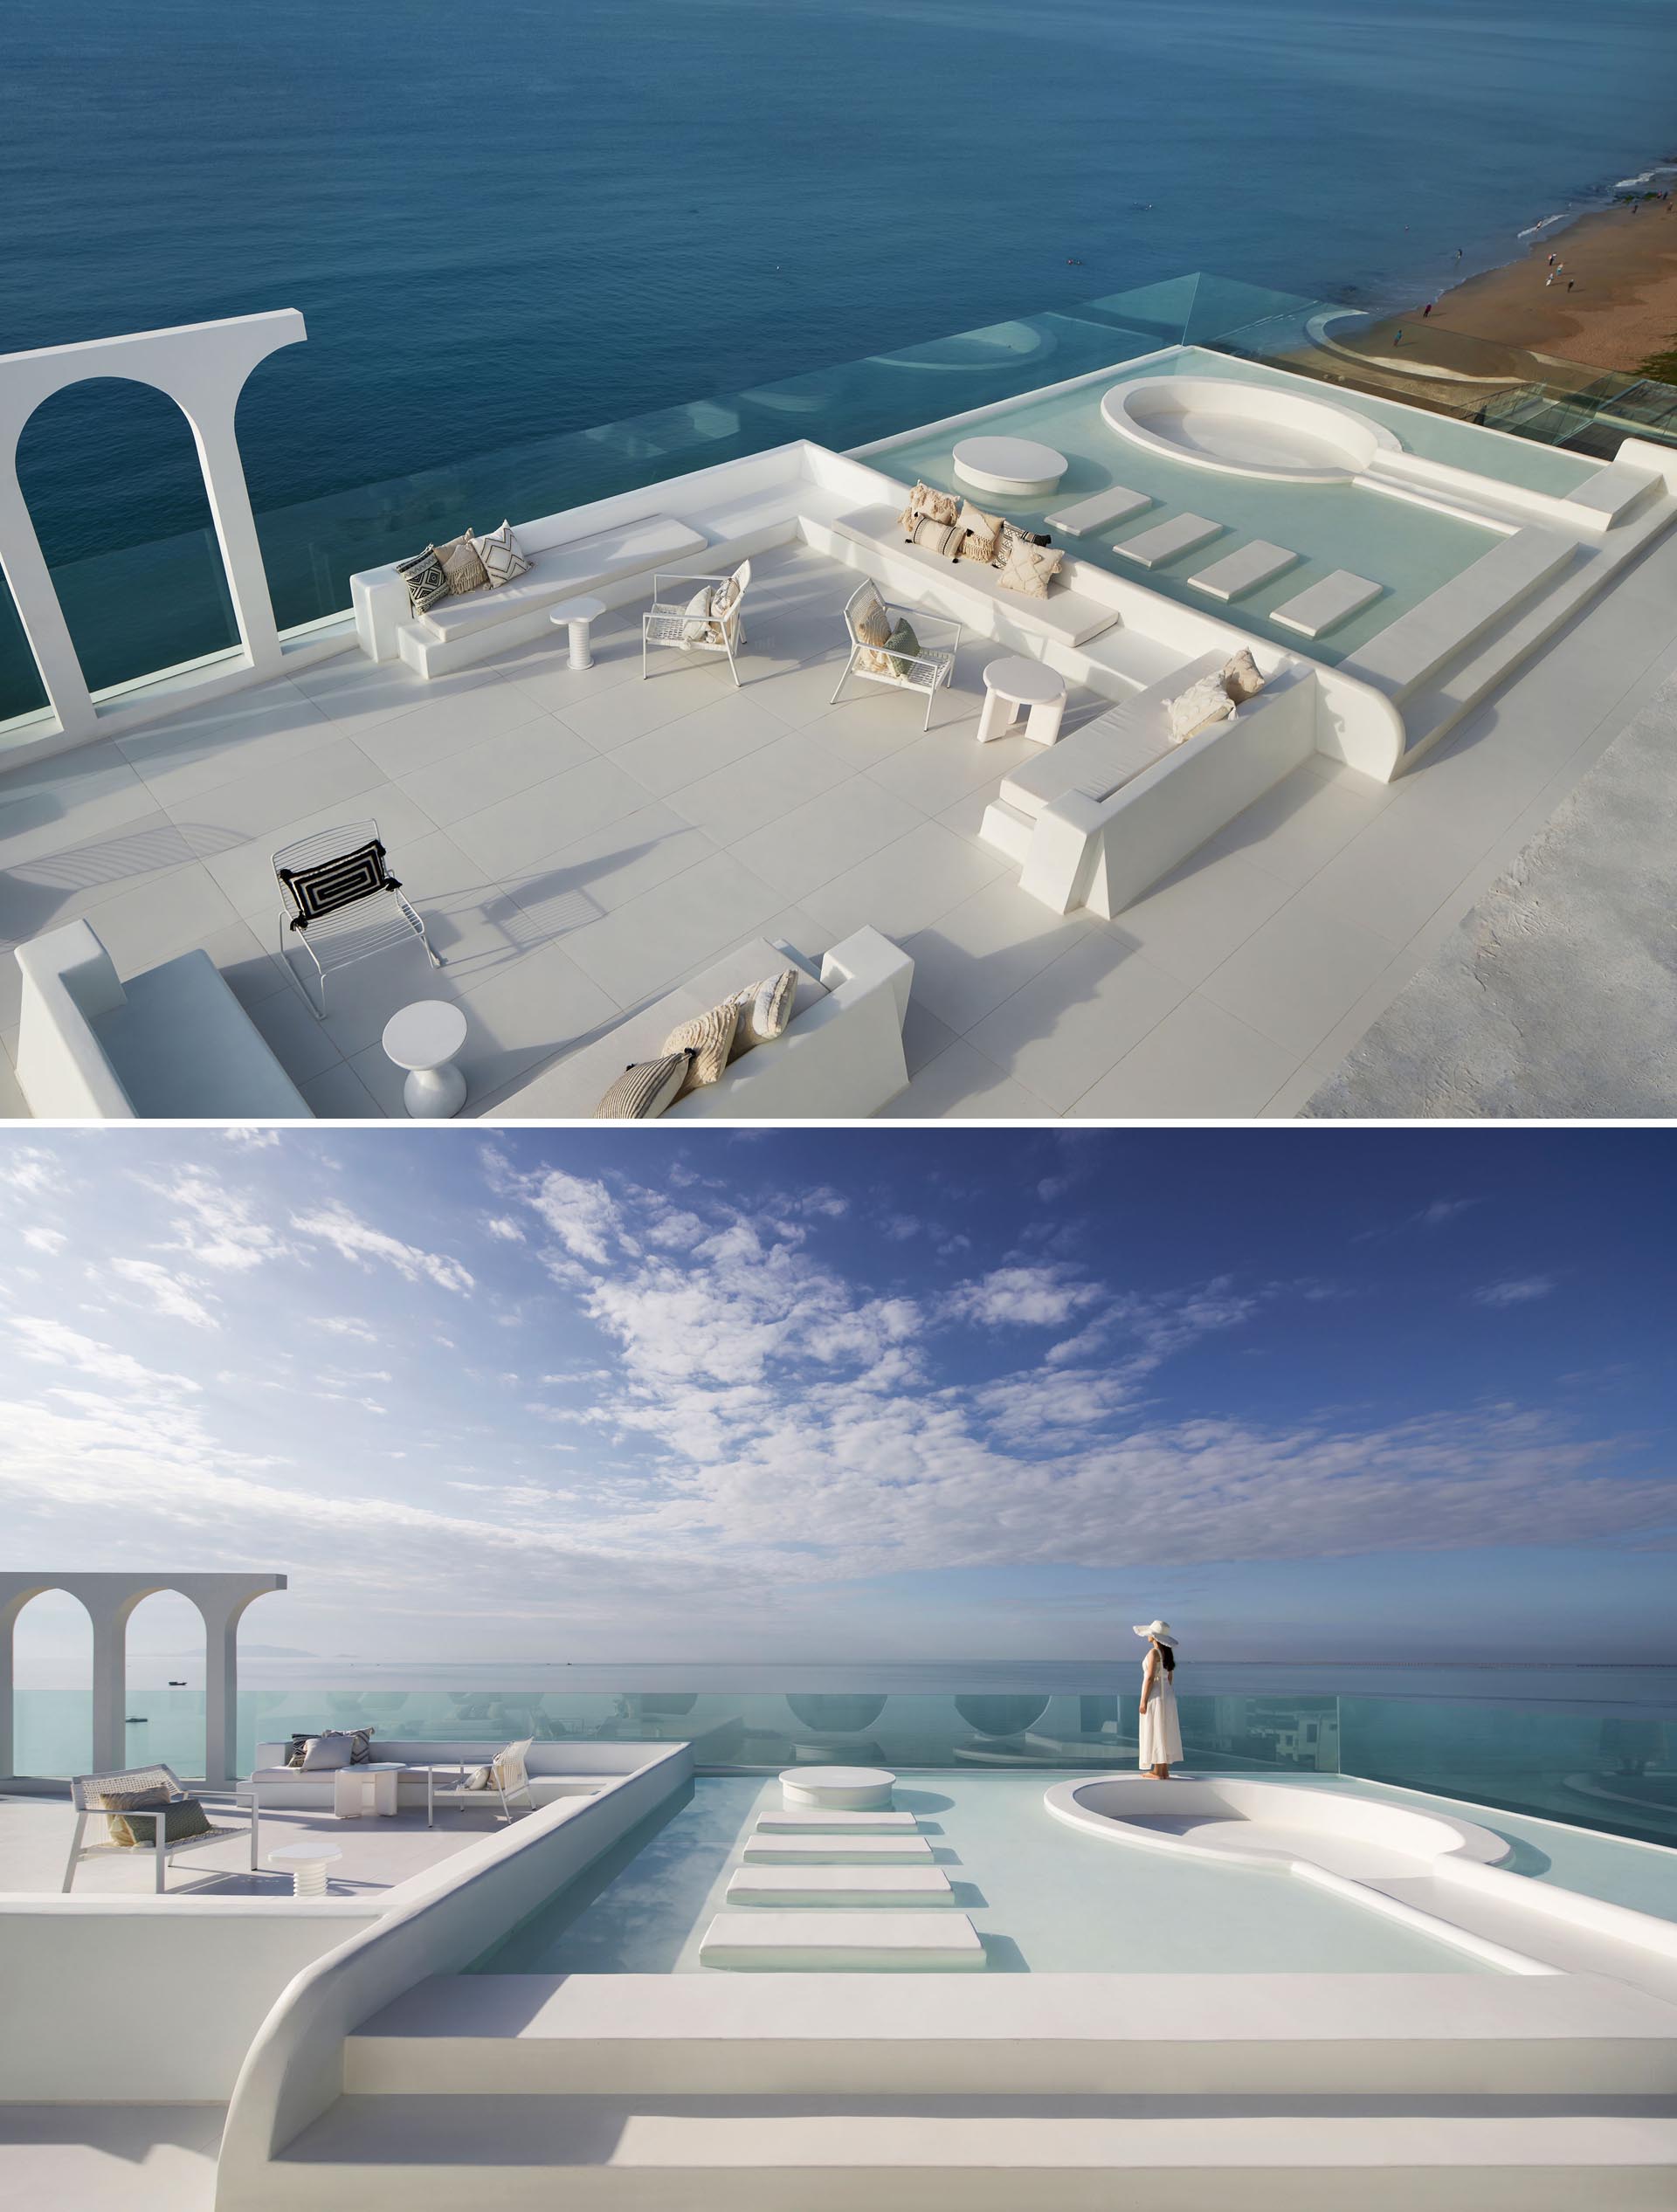 A modern hotel rooftop lounge includes a shallow water feature, stone steps, a sunken seating area, built-in seating, and an arch installation for the perfect spot for photographs.